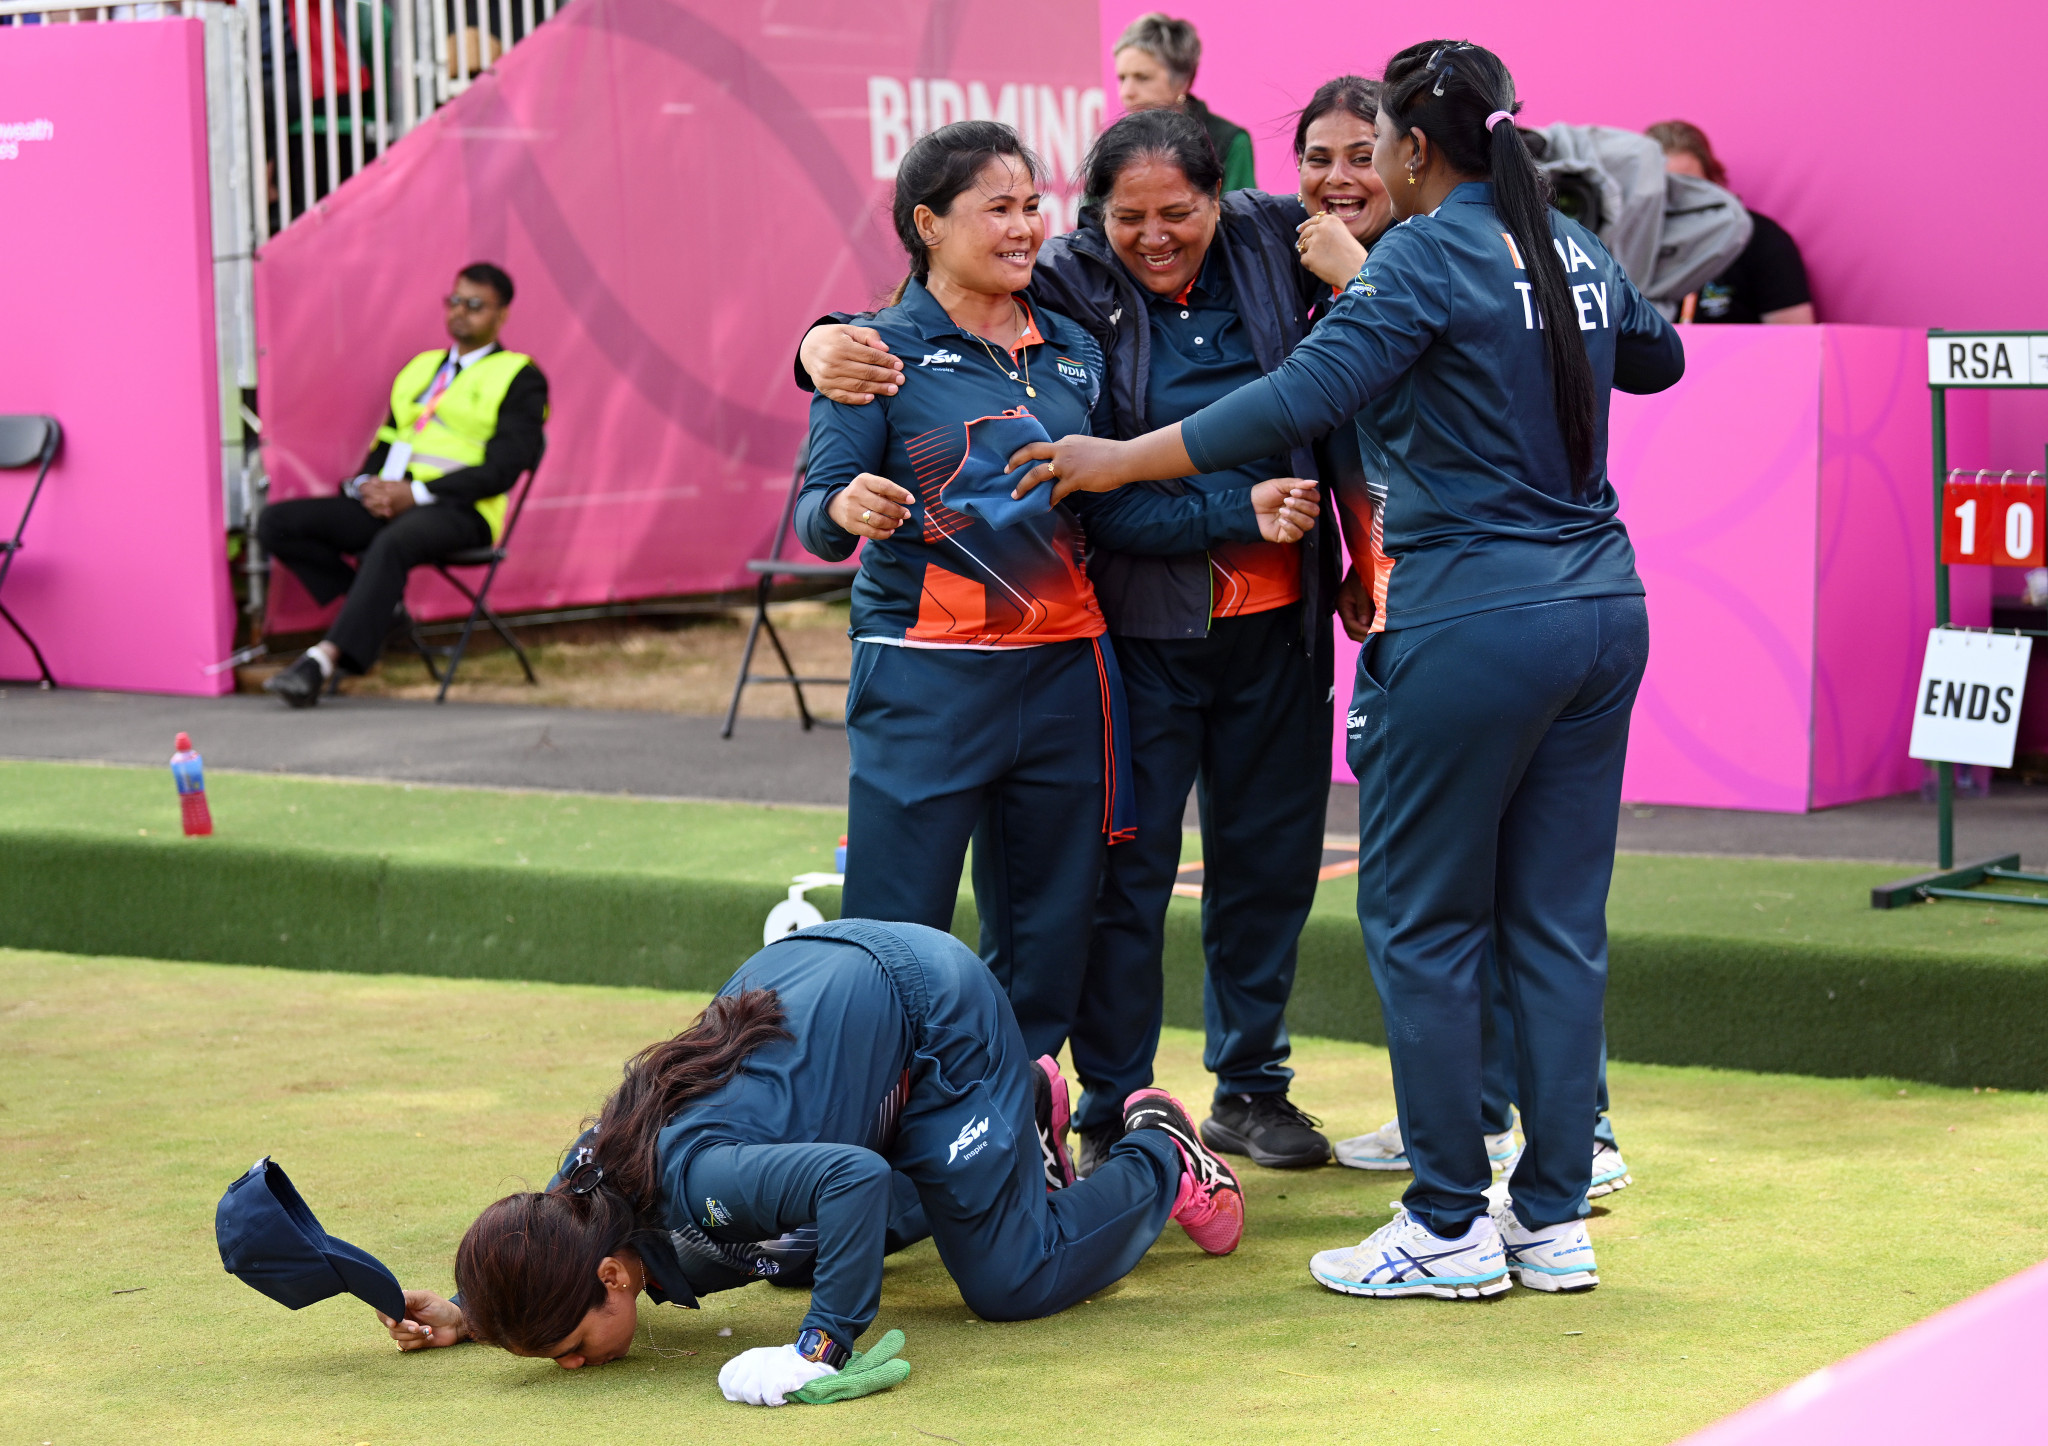 Lovely story for India as they win first Commonwealth Games lawn bowls gold